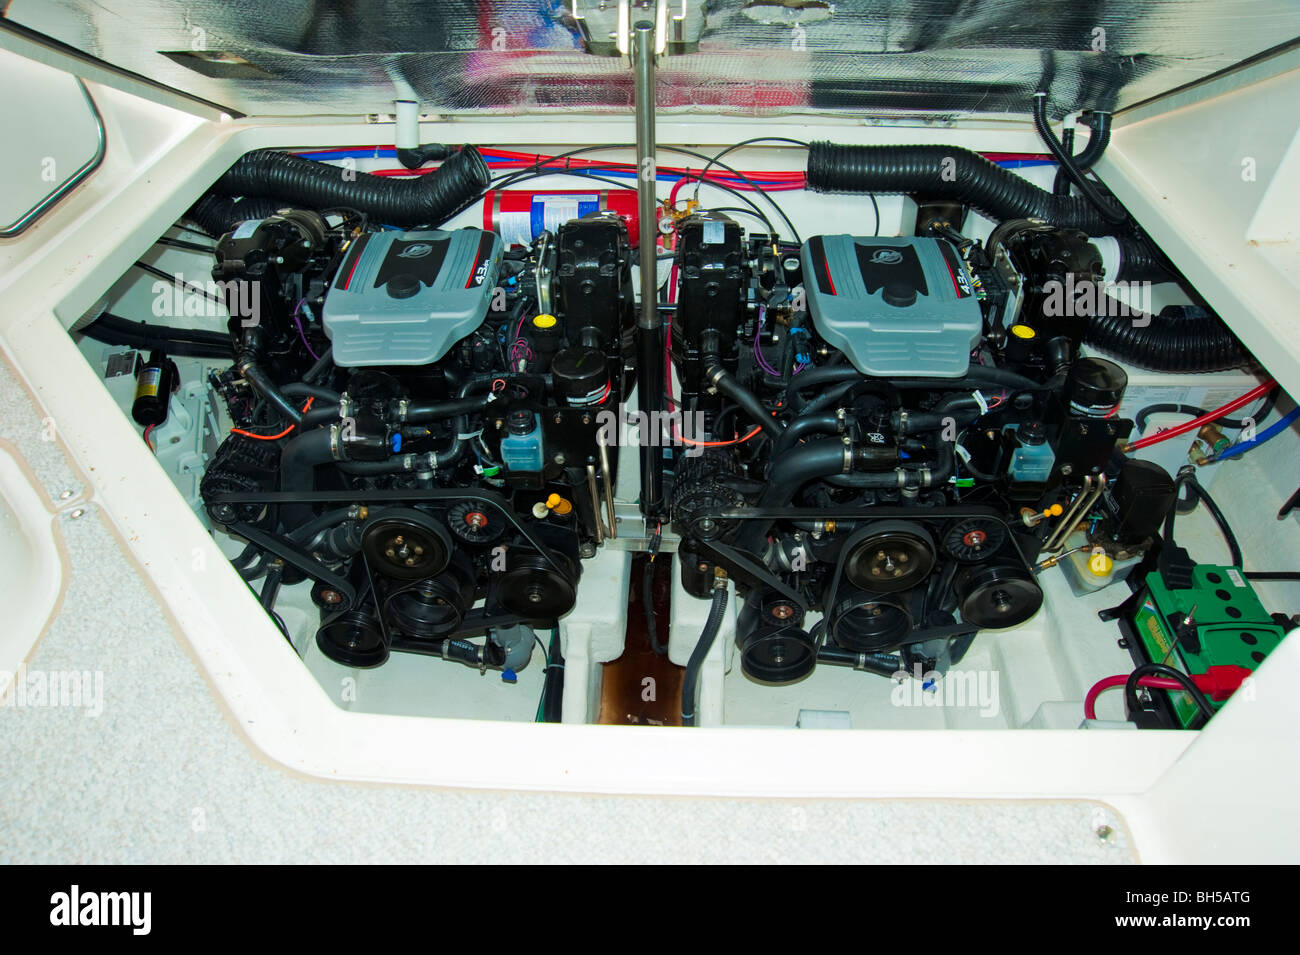 Engine room with twin Mercruiser engines of a Sea Ray 305 powerboat / yacht, 2009 model Stock Photo